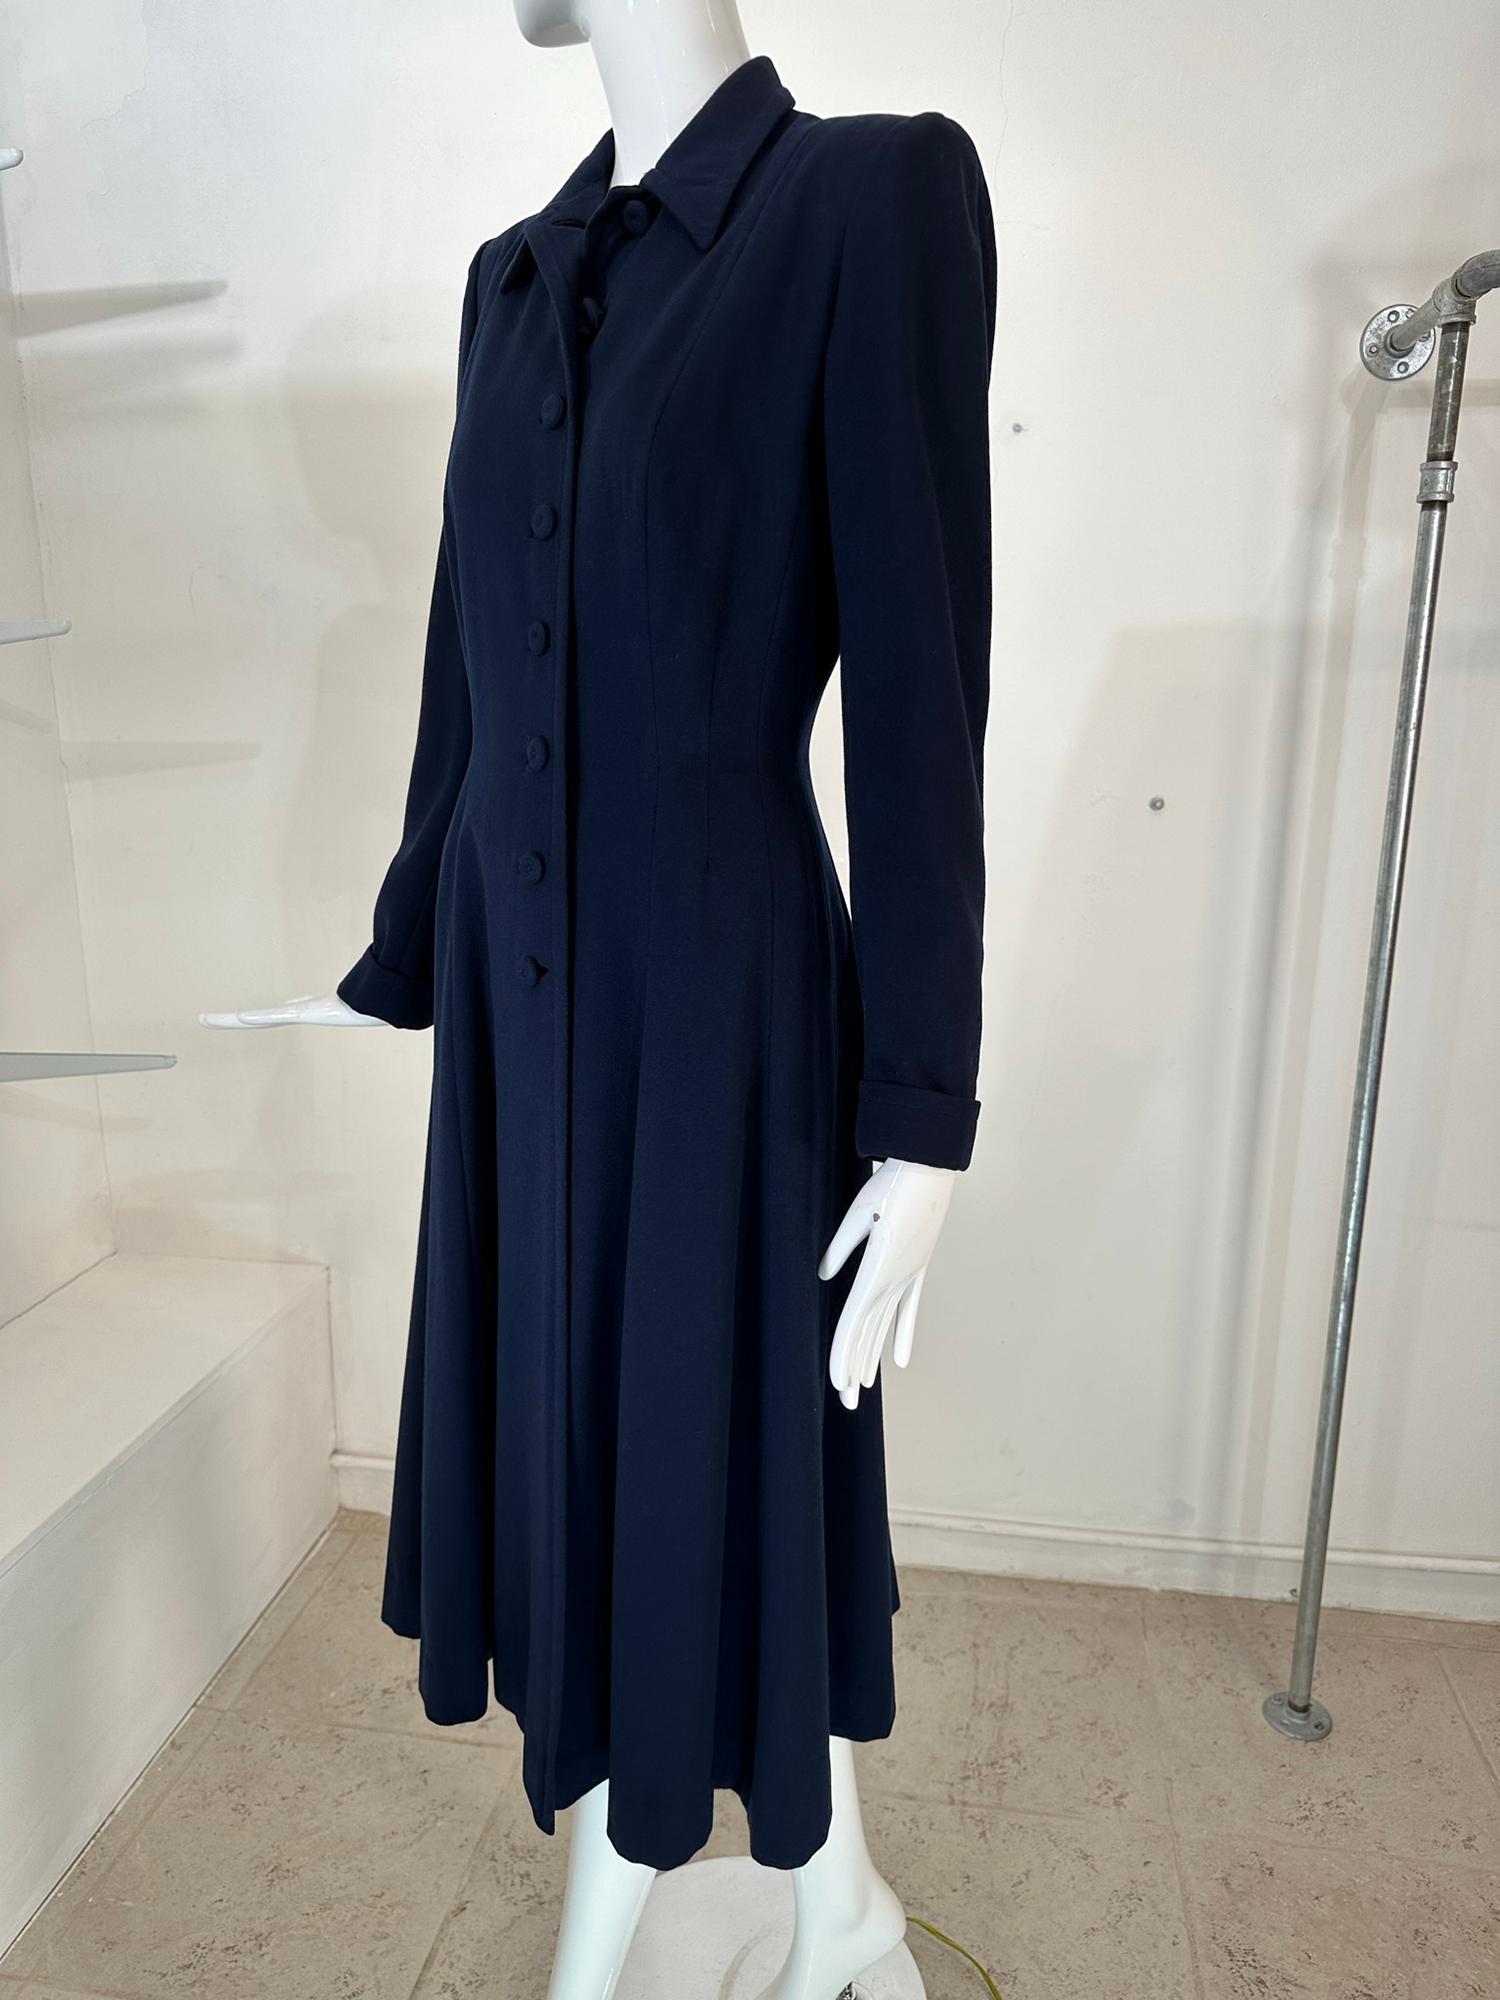 1940s Navy Blue Wool Princess Coat Peterson Gerzog Providence Rhode Island In Good Condition For Sale In West Palm Beach, FL